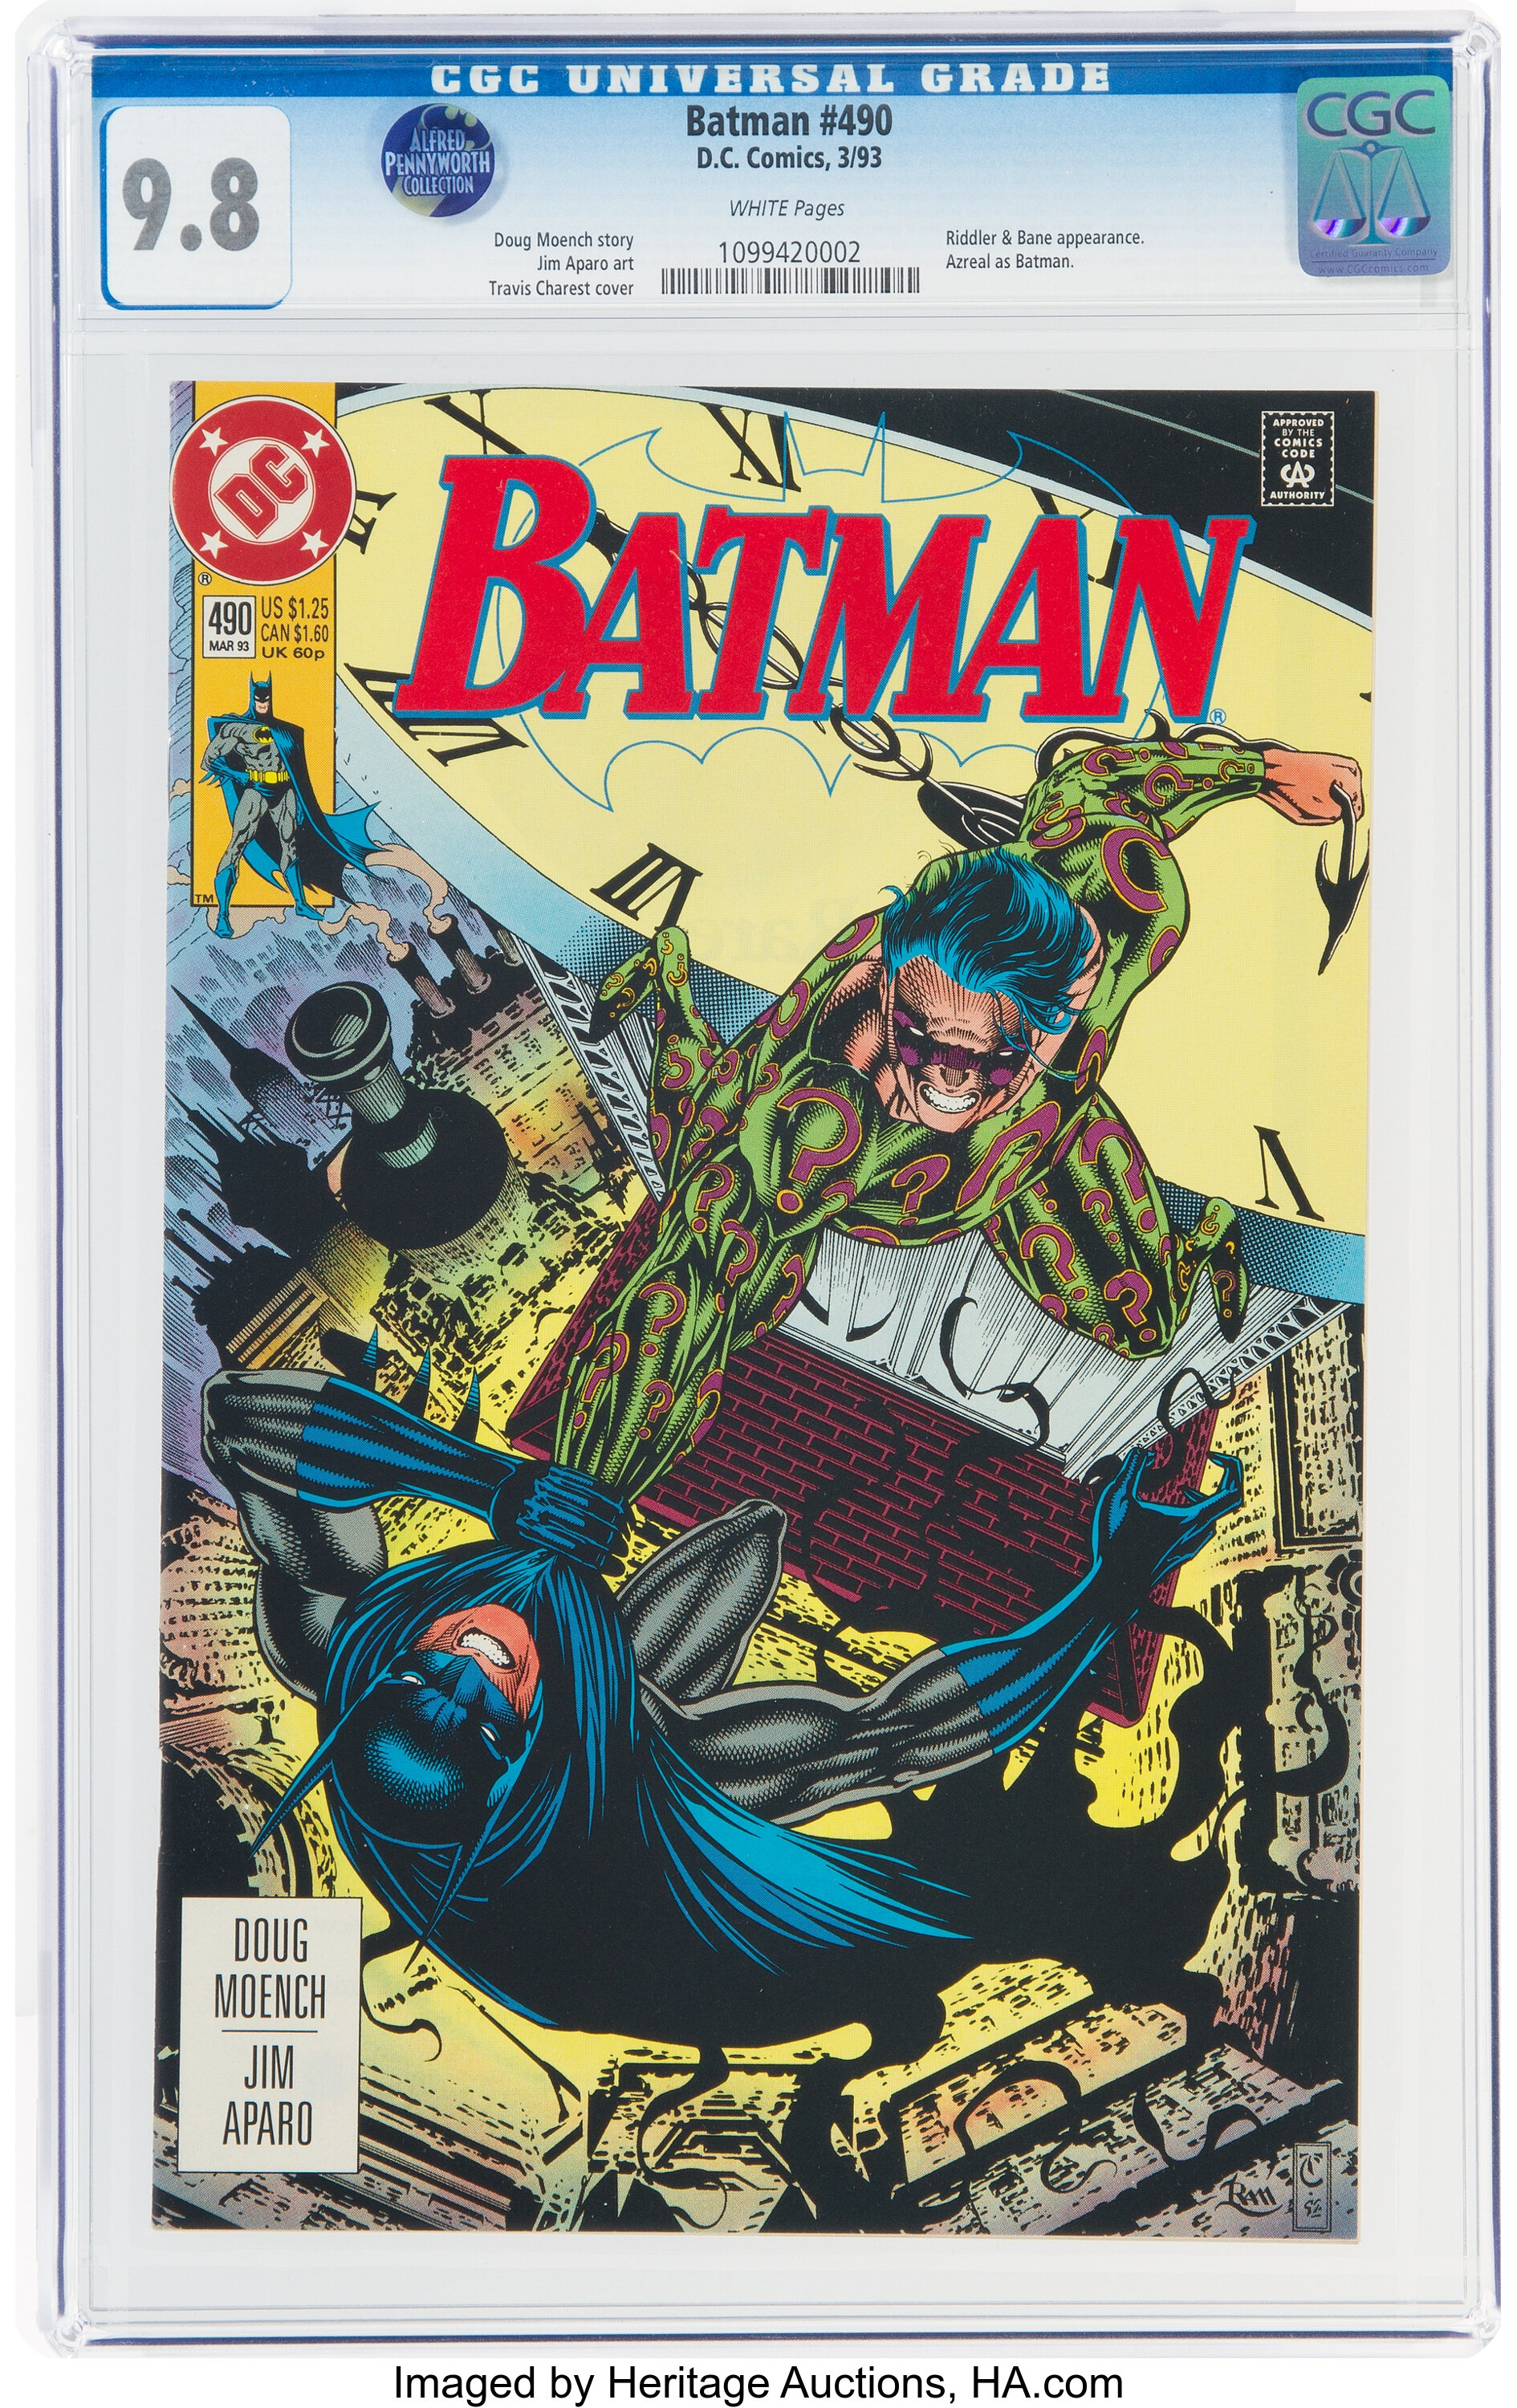 How Much Is Batman #490 Worth? Browse Comic Prices | Heritage Auctions